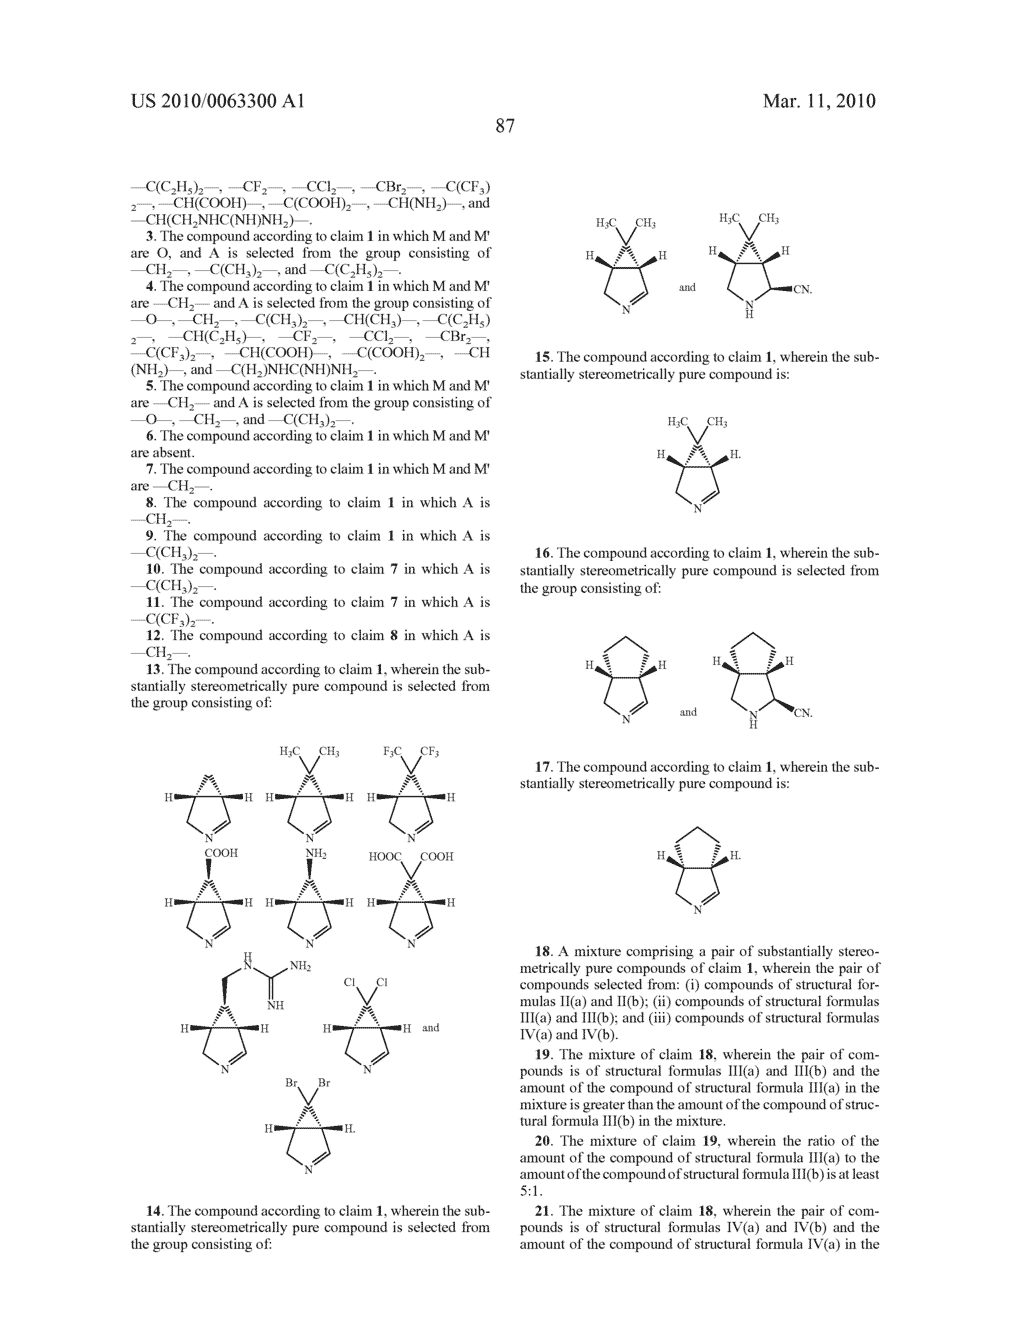 BIOCATALYTIC PROCESSES FOR THE PREPARATION OF SUBSTANTIALLY STEREOMERICALLY PURE FUSED BICYCLIC PROLINE COMPOUNDS - diagram, schematic, and image 88